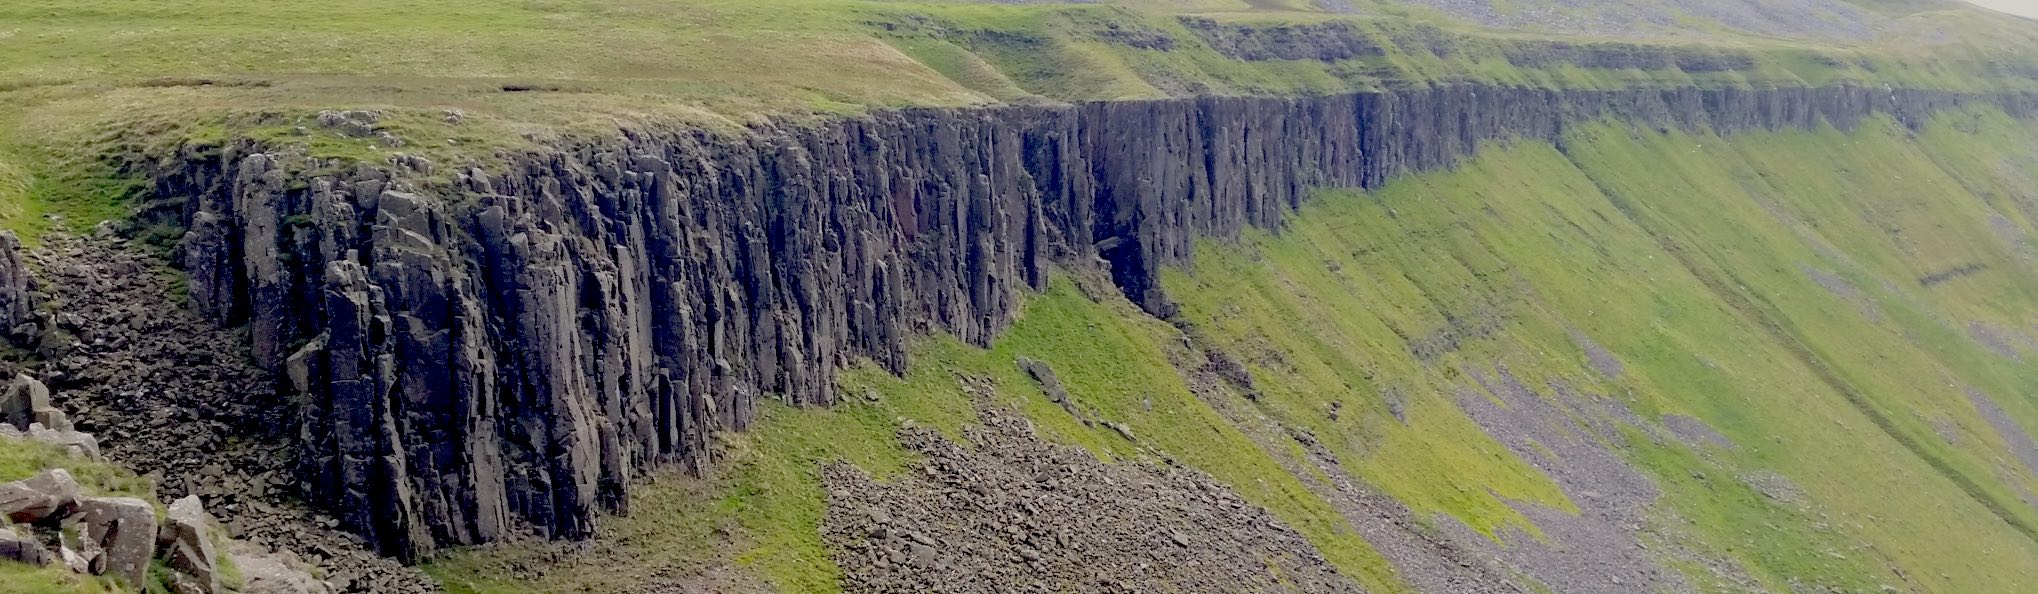 North Pennines - Cross Fell, High Cup Nick and High Force feature image